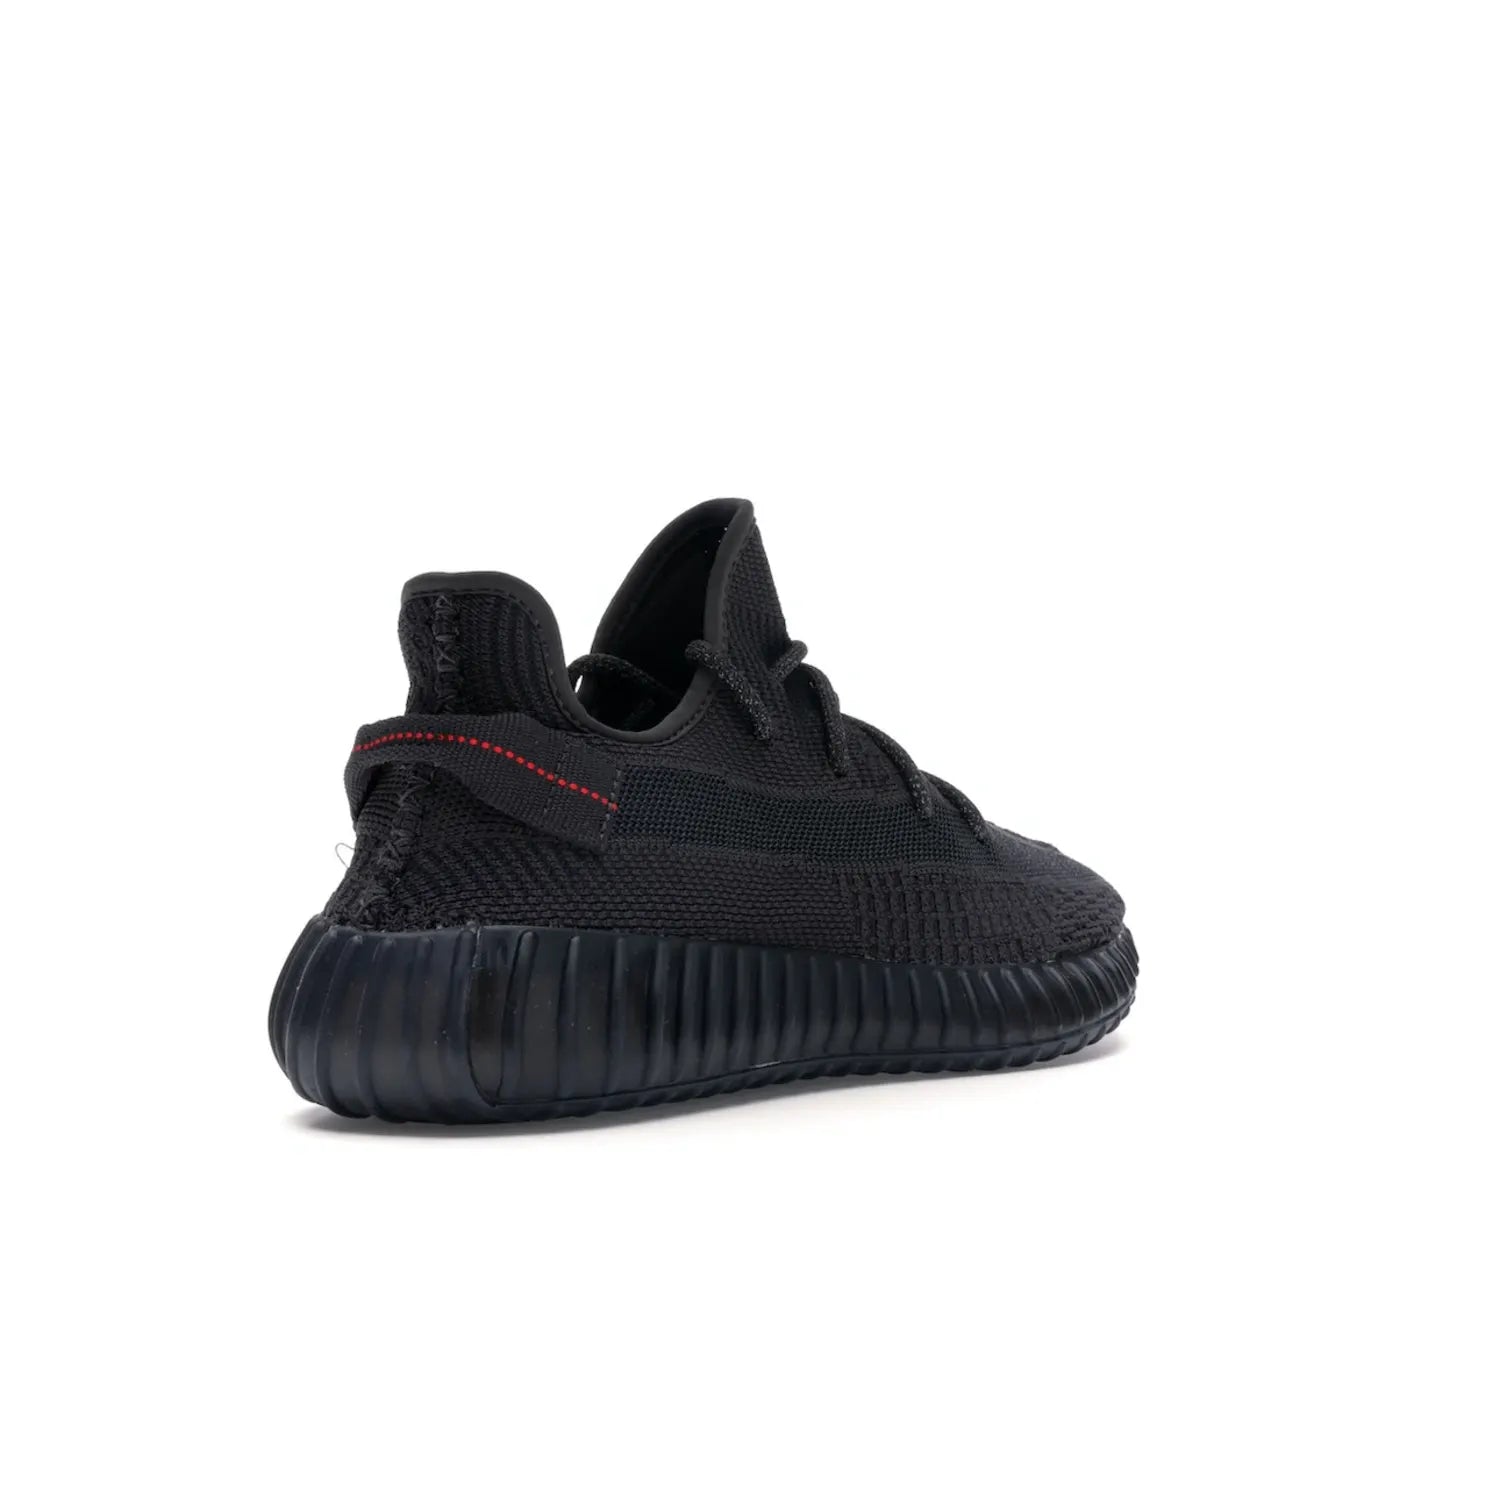 adidas Yeezy Boost 350 V2 Black (Non-Reflective) - Image 32 - Only at www.BallersClubKickz.com - A timeless, sleek silhouette crafted from quality materials. The adidas Yeezy Boost 350 V2 Black (Non-Reflective) brings style and sophistication. Get yours now!